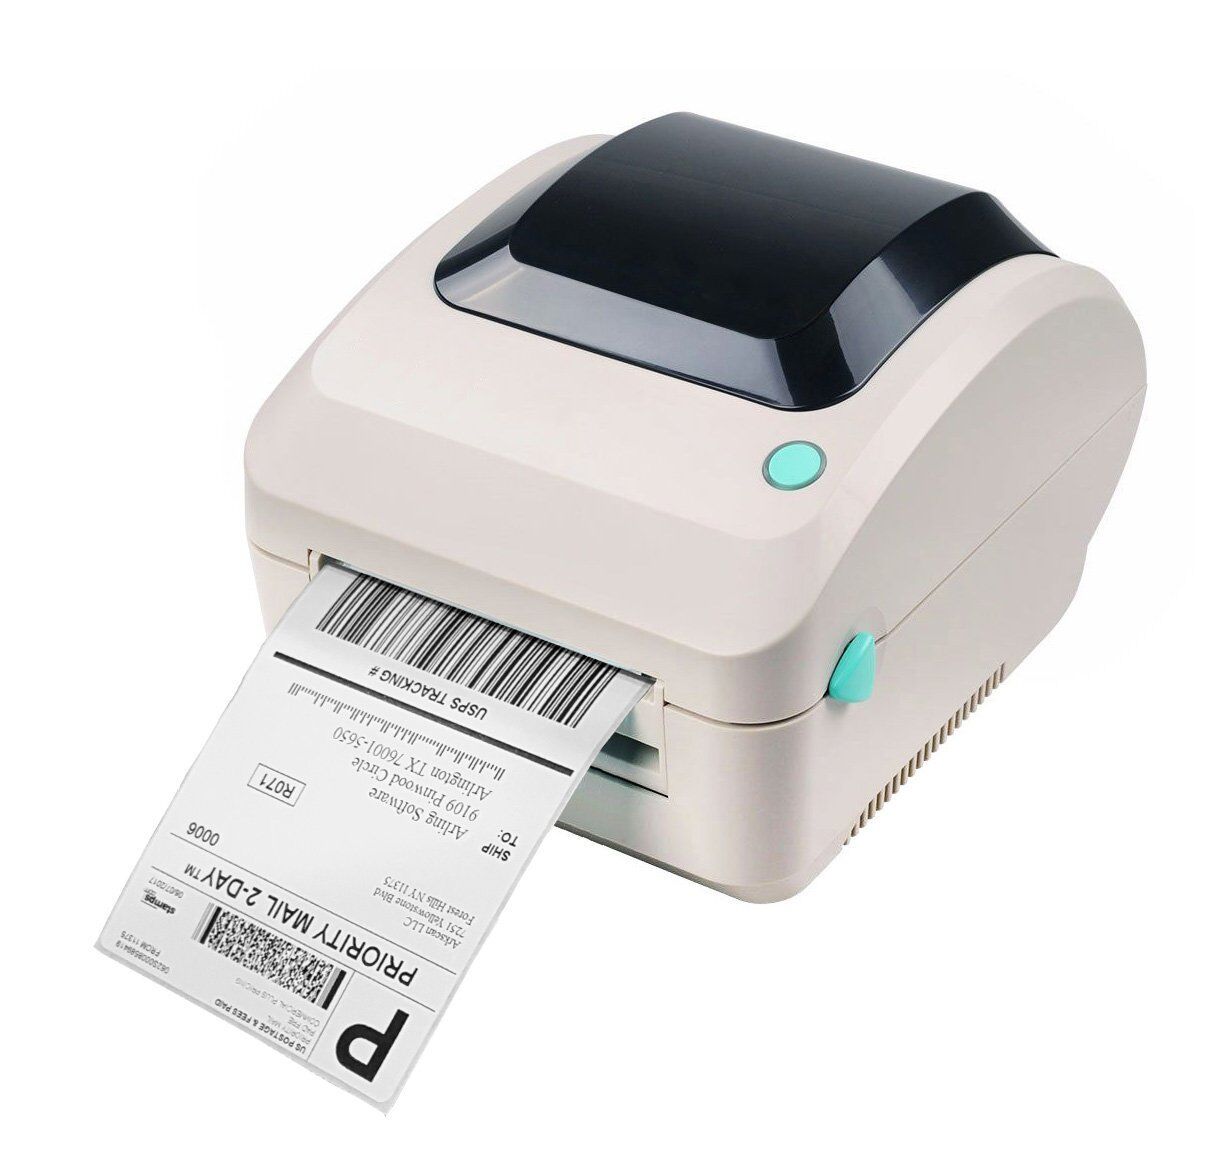 Arkscan 2054A USB Shipping Label Printer for Windows & Mac, support Amazon ebay